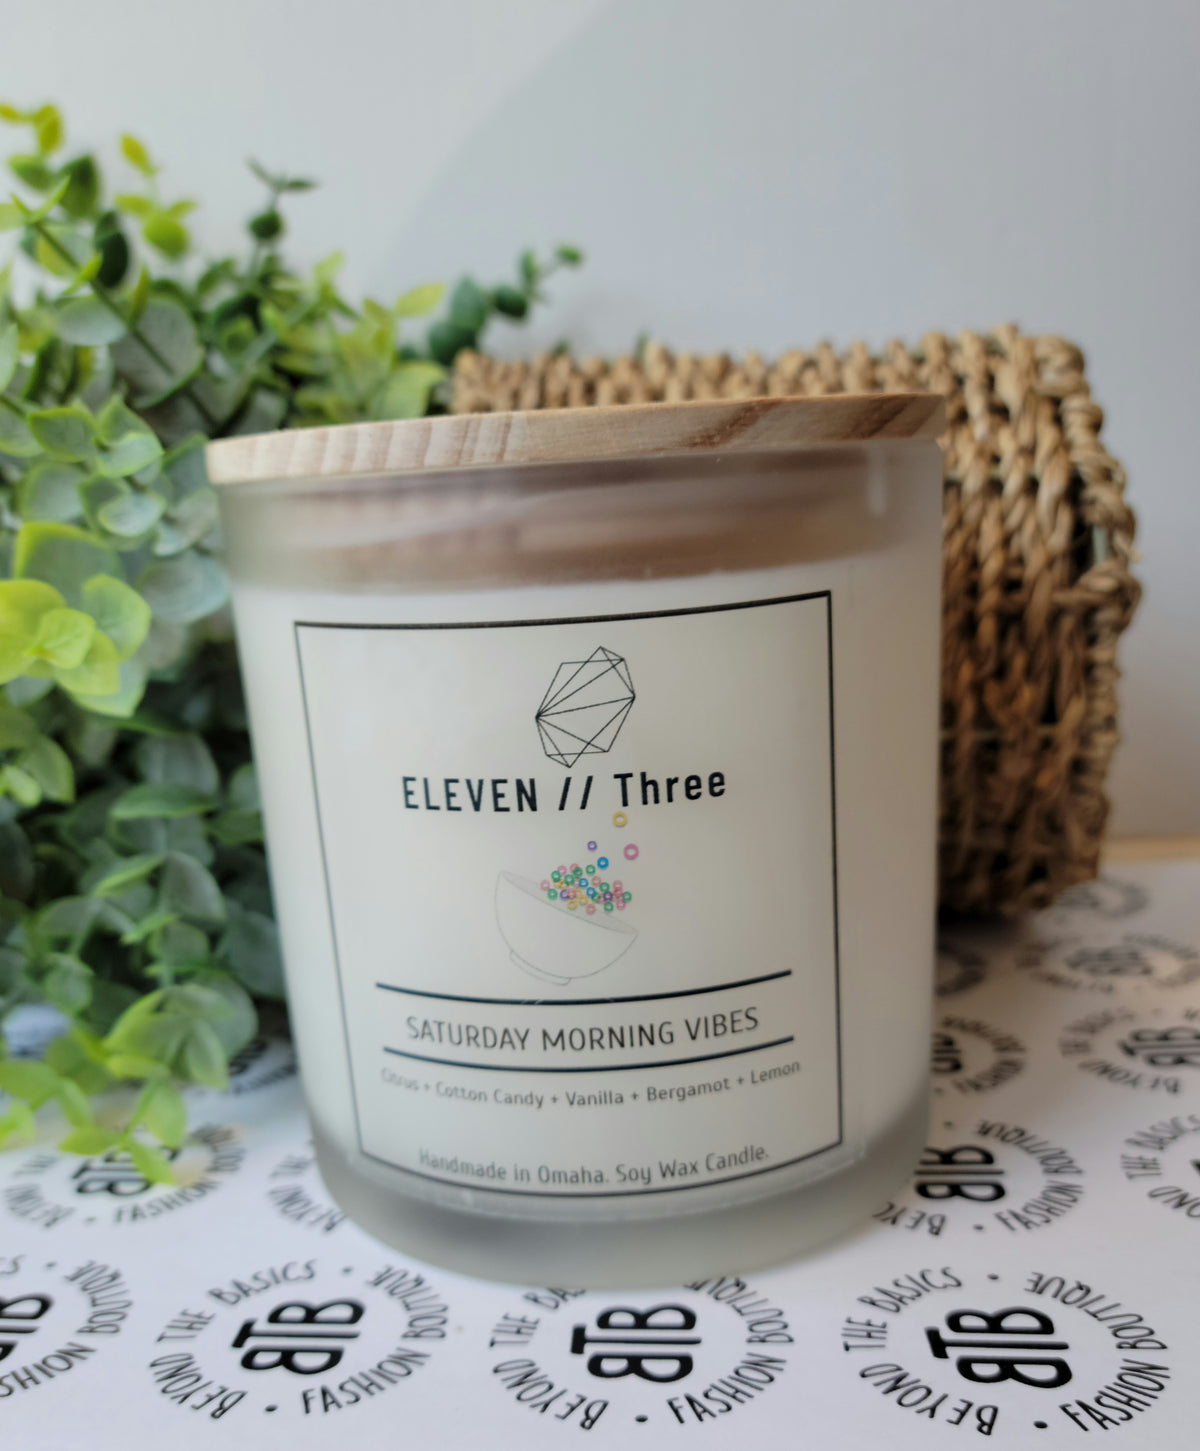 Saturday Morning Vibes Candle